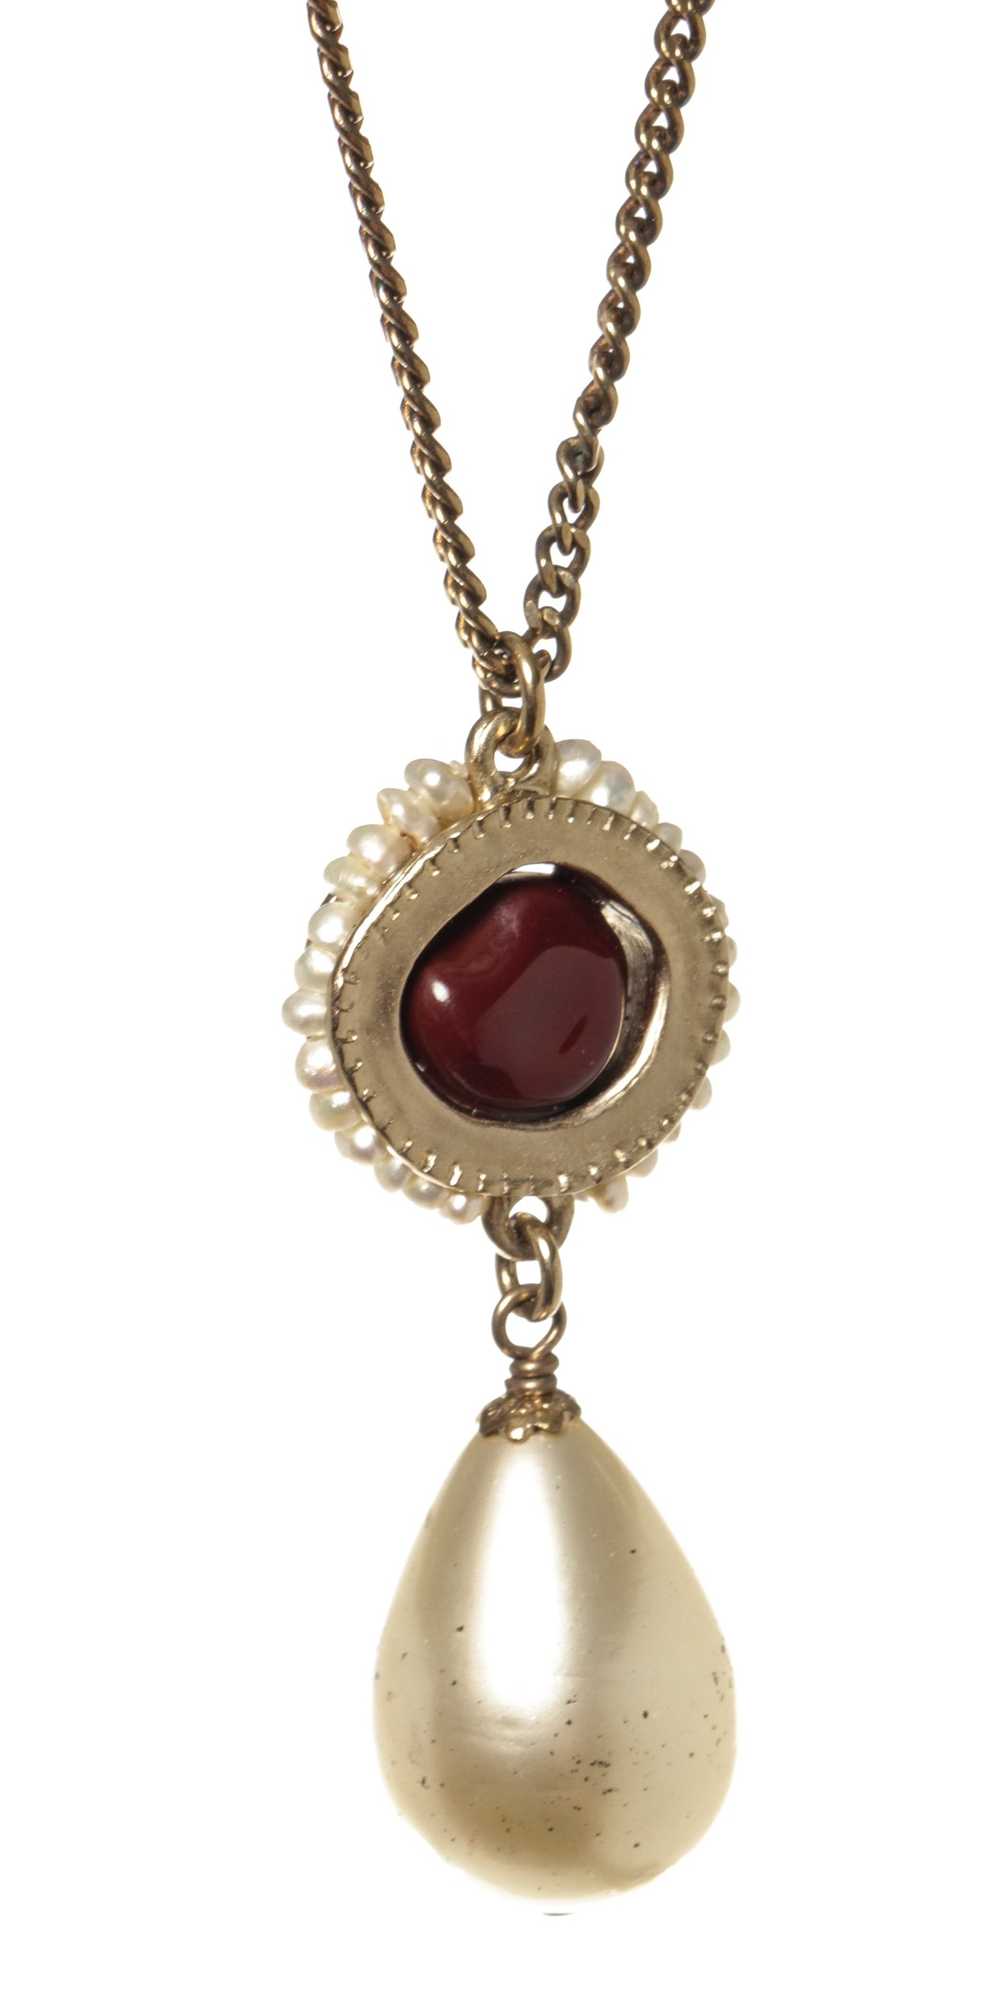 Chanel Chanel Red Stone Teardrop Pearl Necklace - image 3